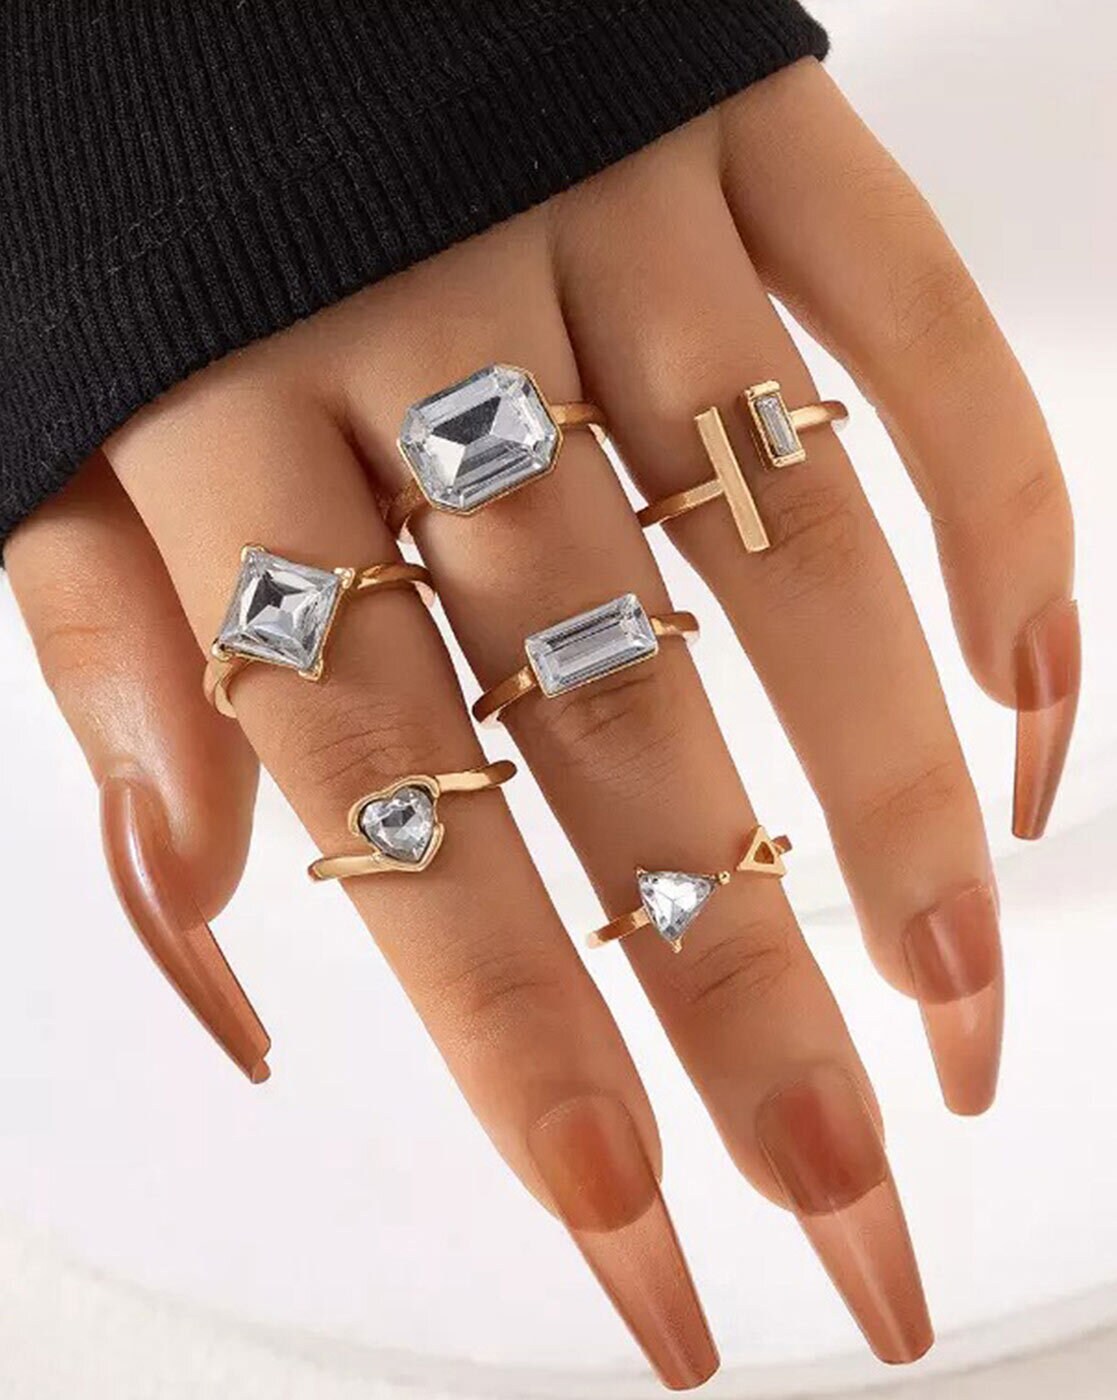 Buy Gold-Toned Rings for Women by Jewels galaxy Online